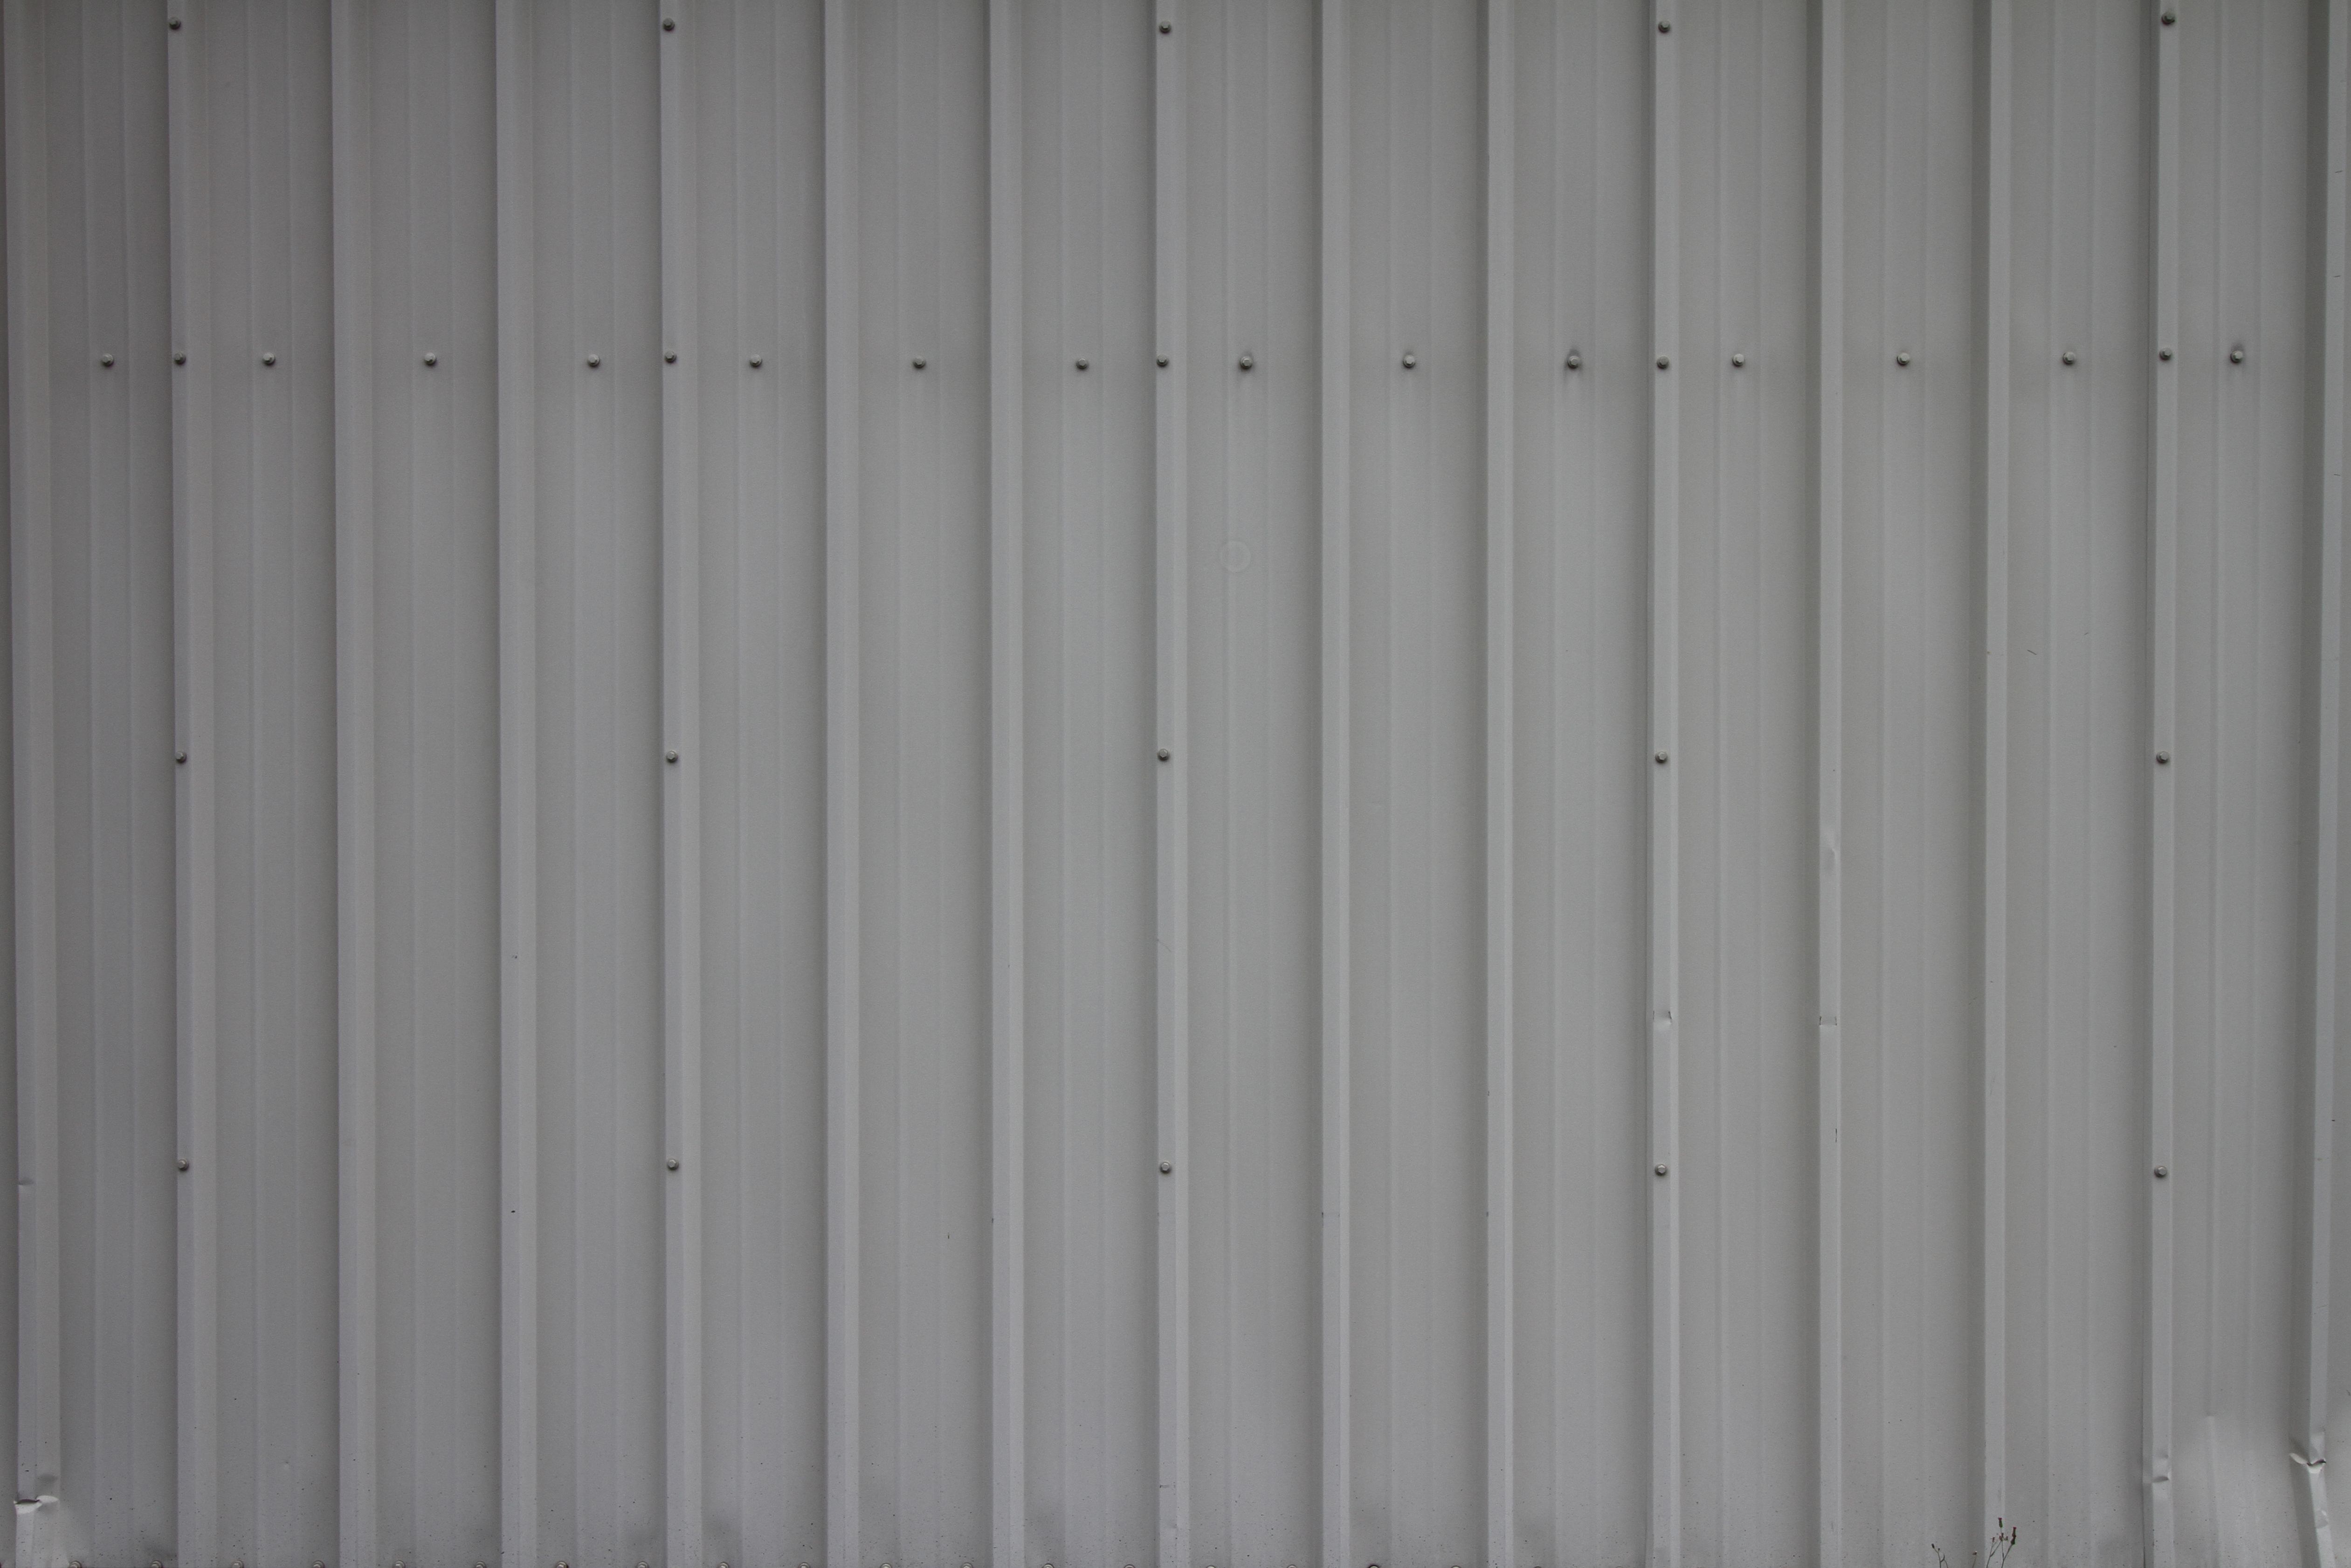 Corrugated Gray Metal Texture - 14Textures